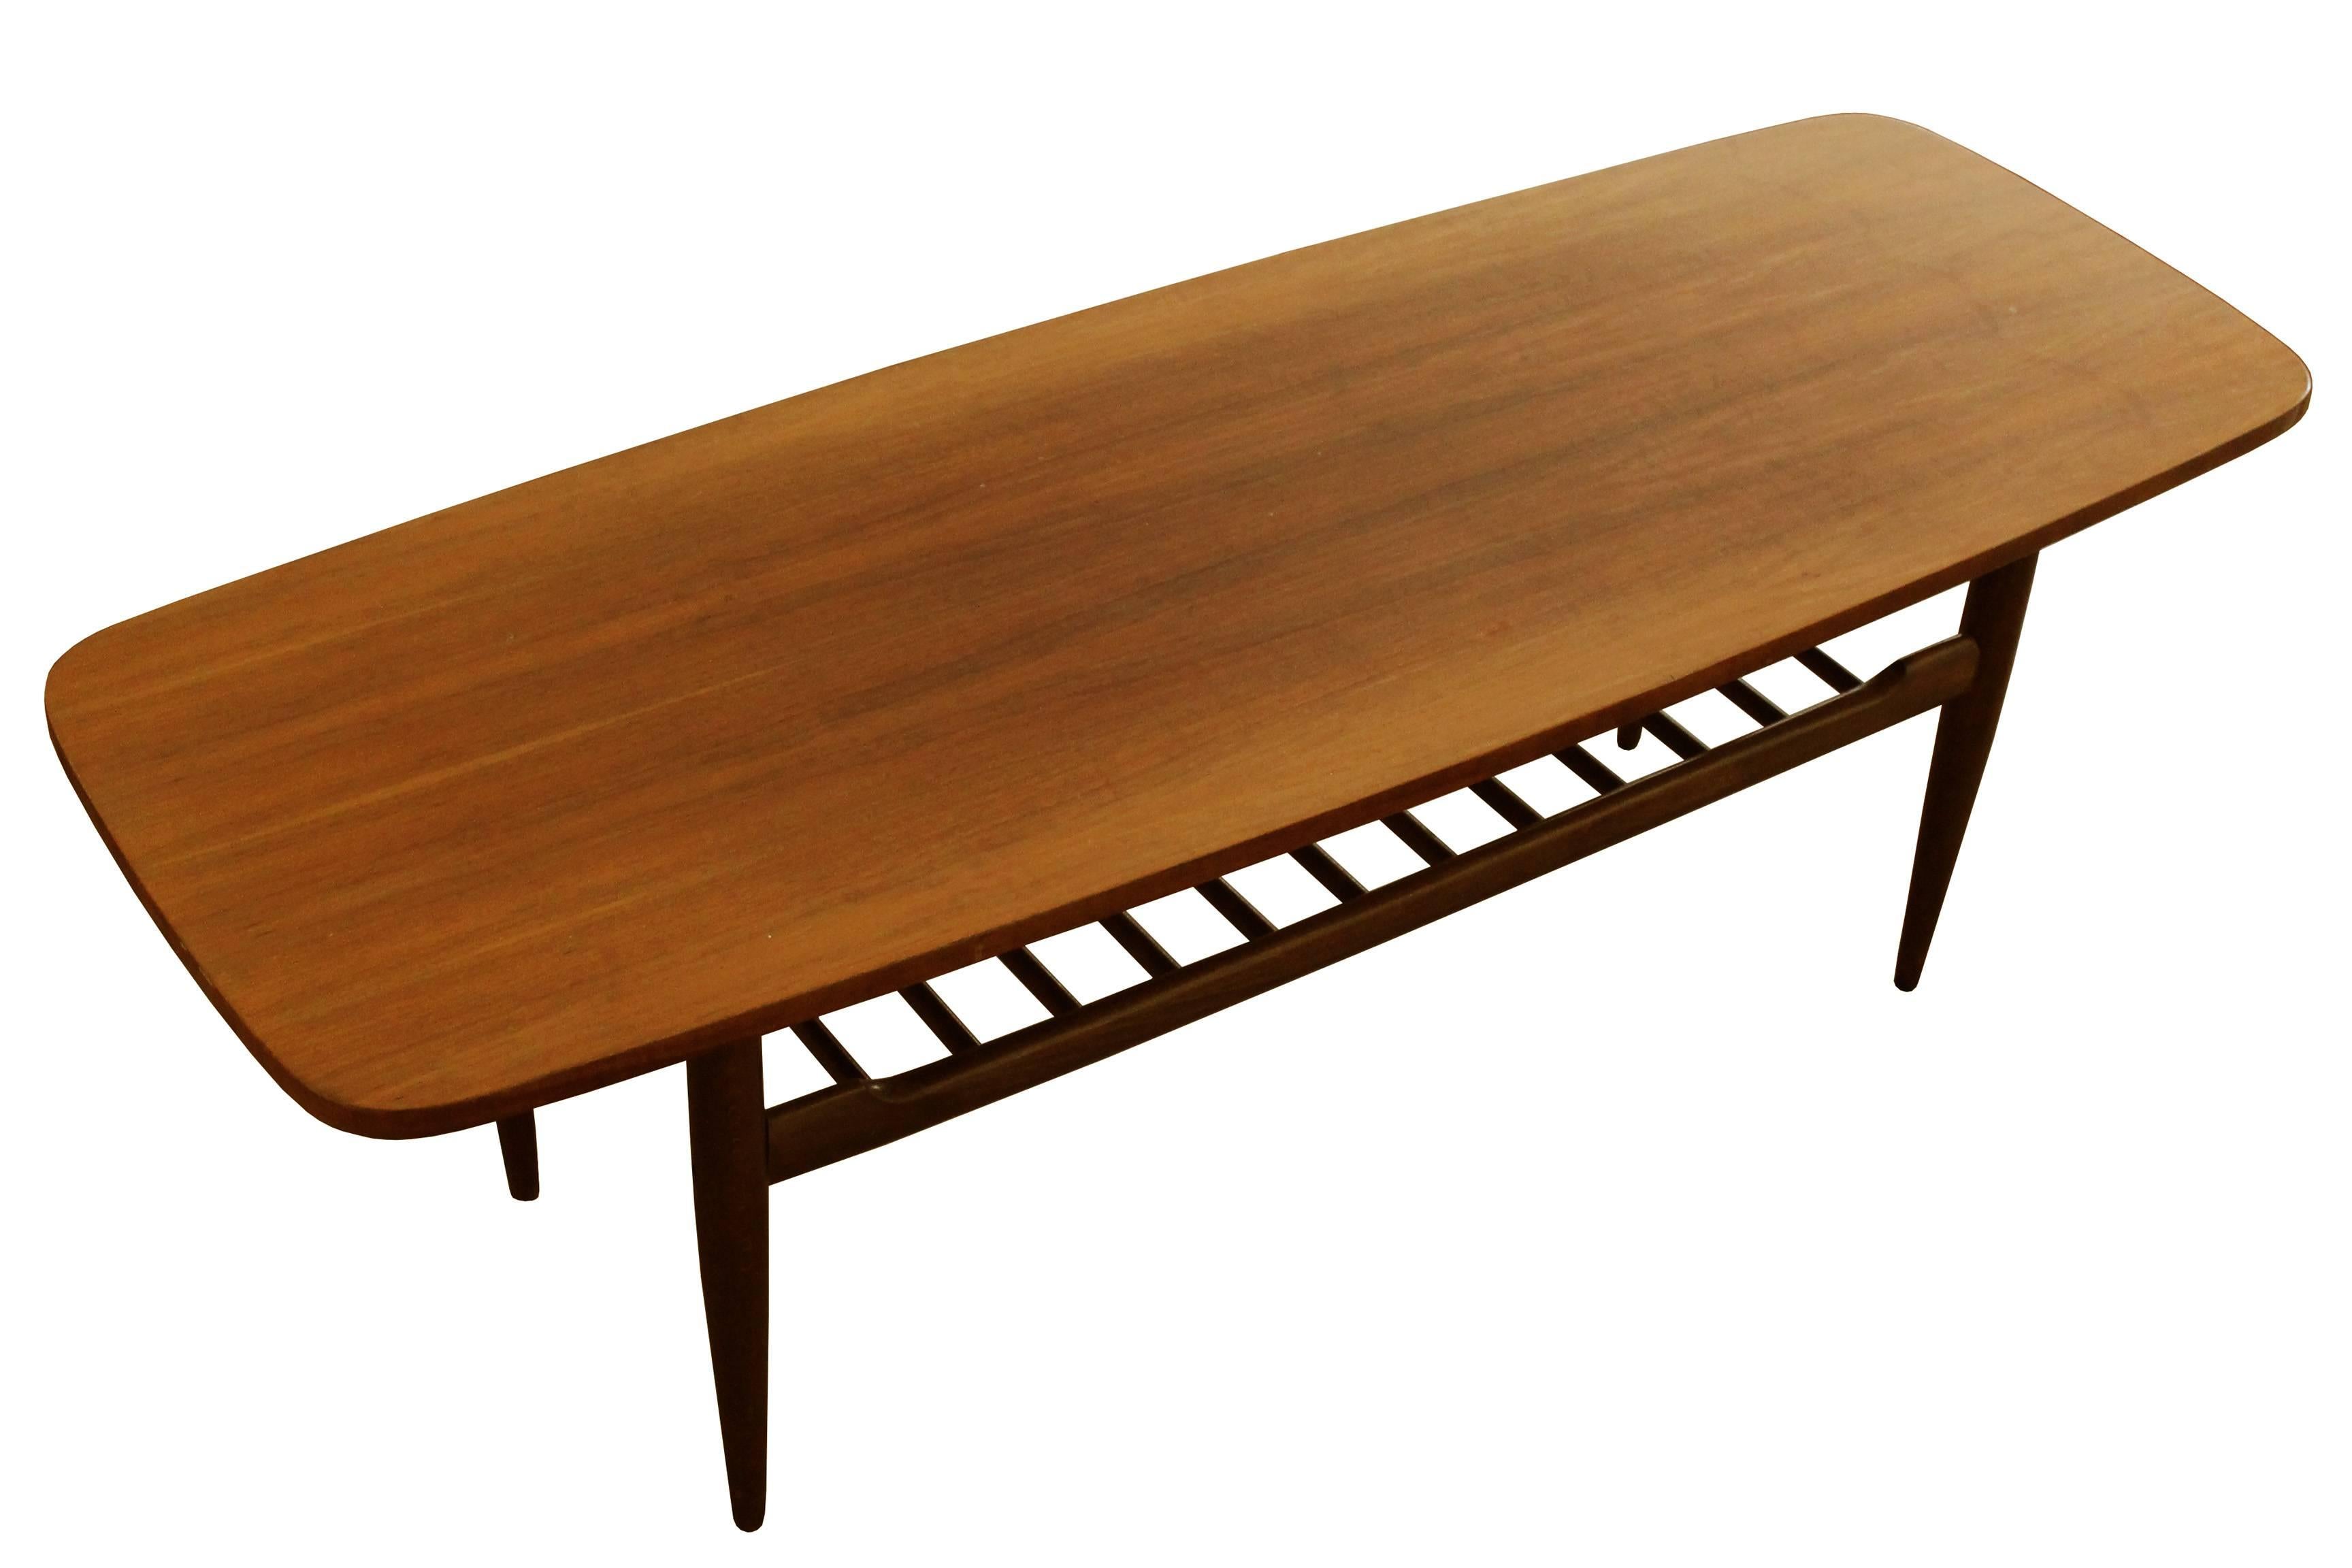 A beautiful coffee table in excellent original condition. This piece was inspired by Scandinavian design, however it was made and produced in former Czechoslovakia. Since its introduction in late 1970s, the table was used in many expensive hotels